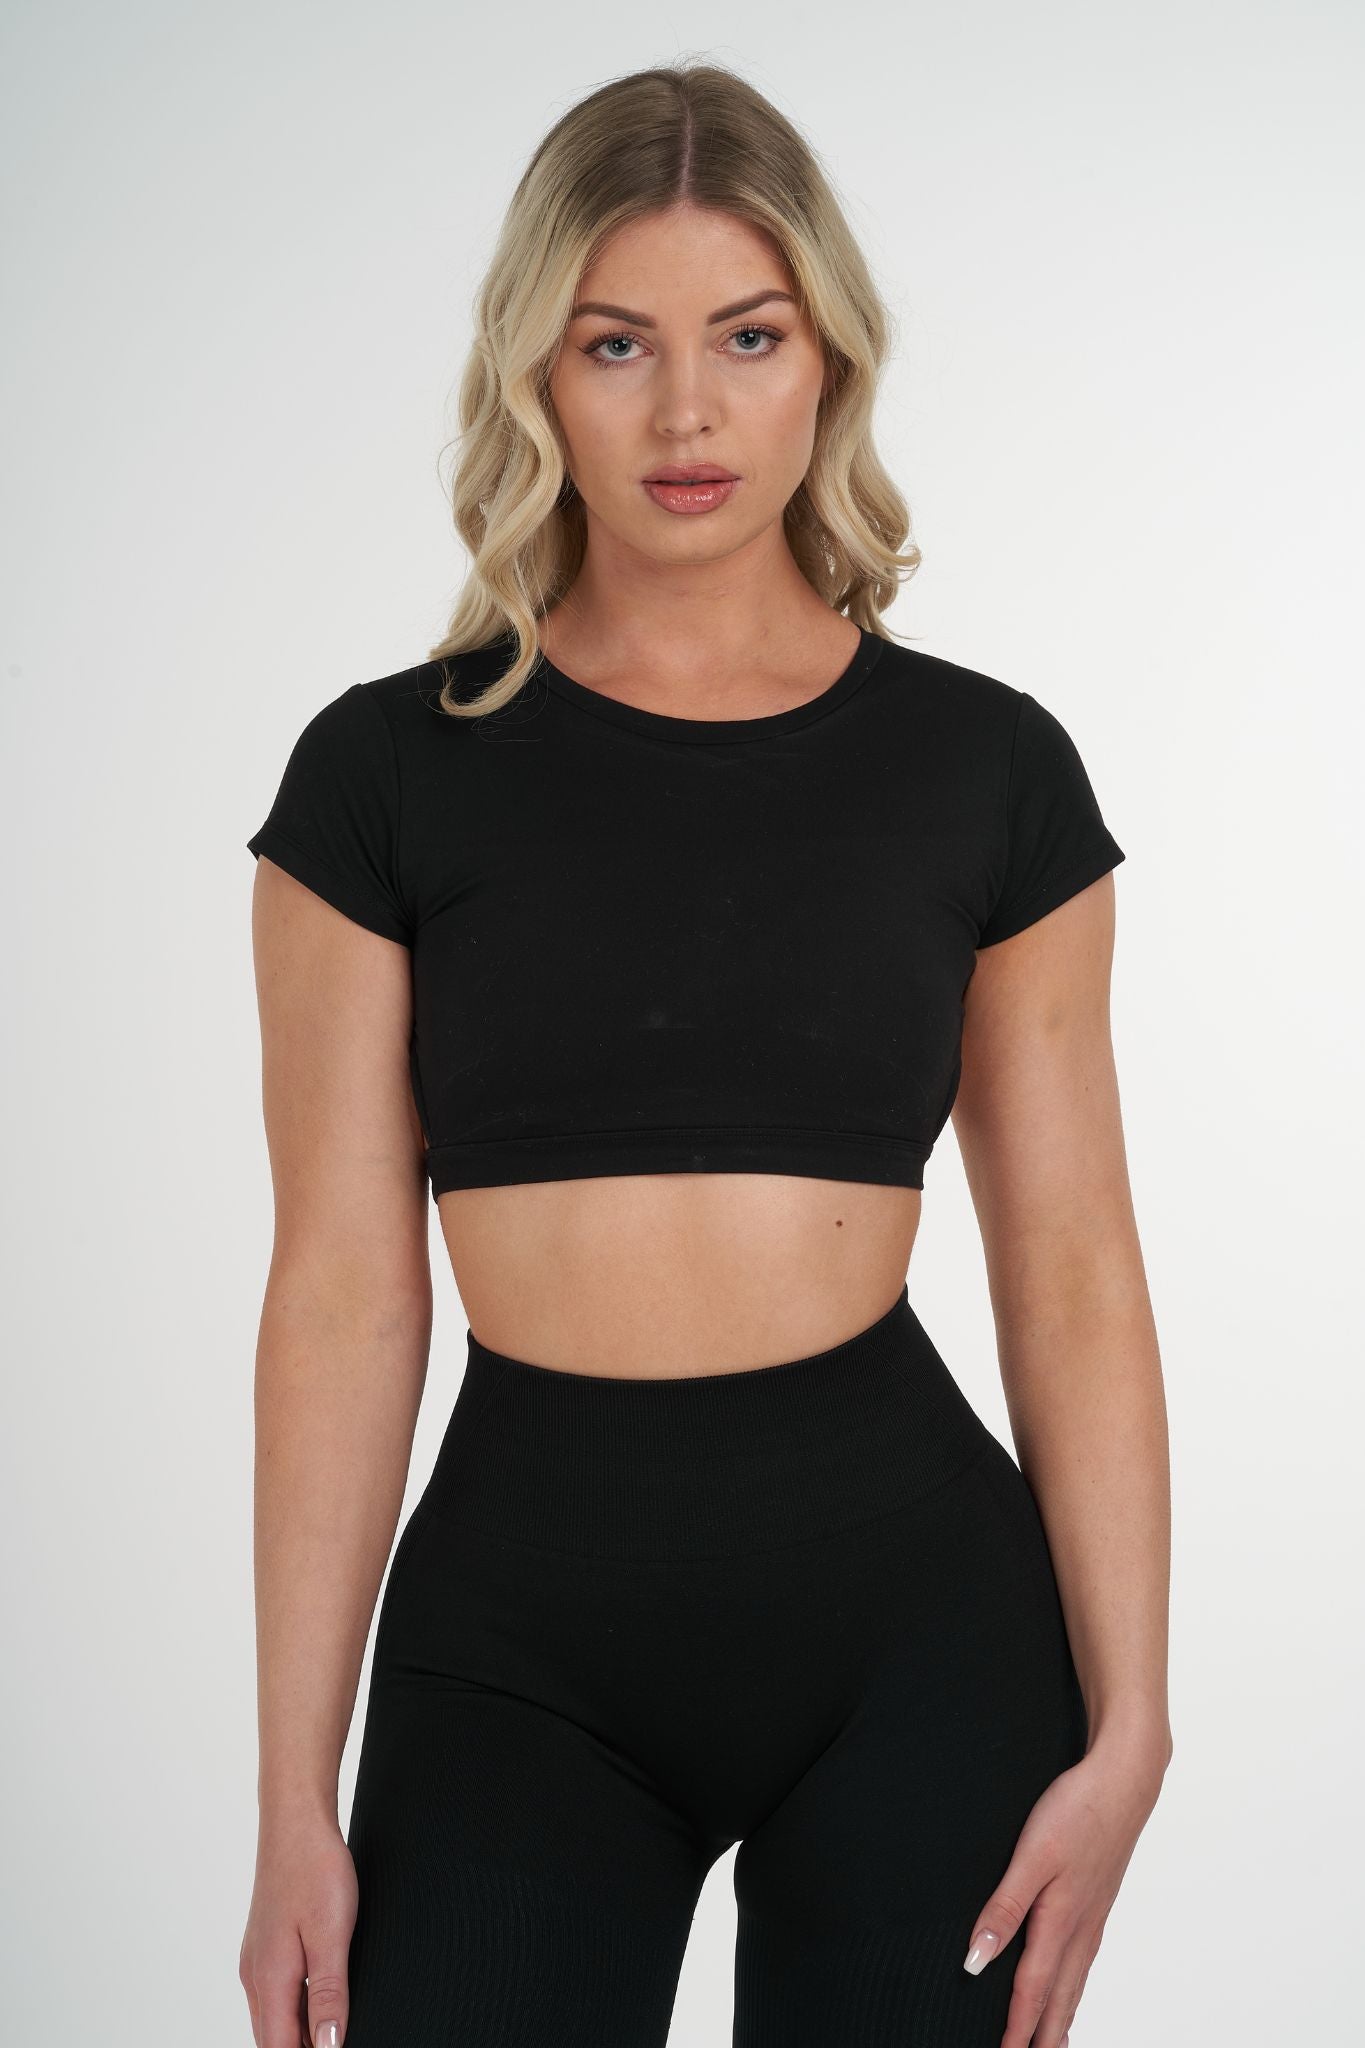 Arise Backless Black Top